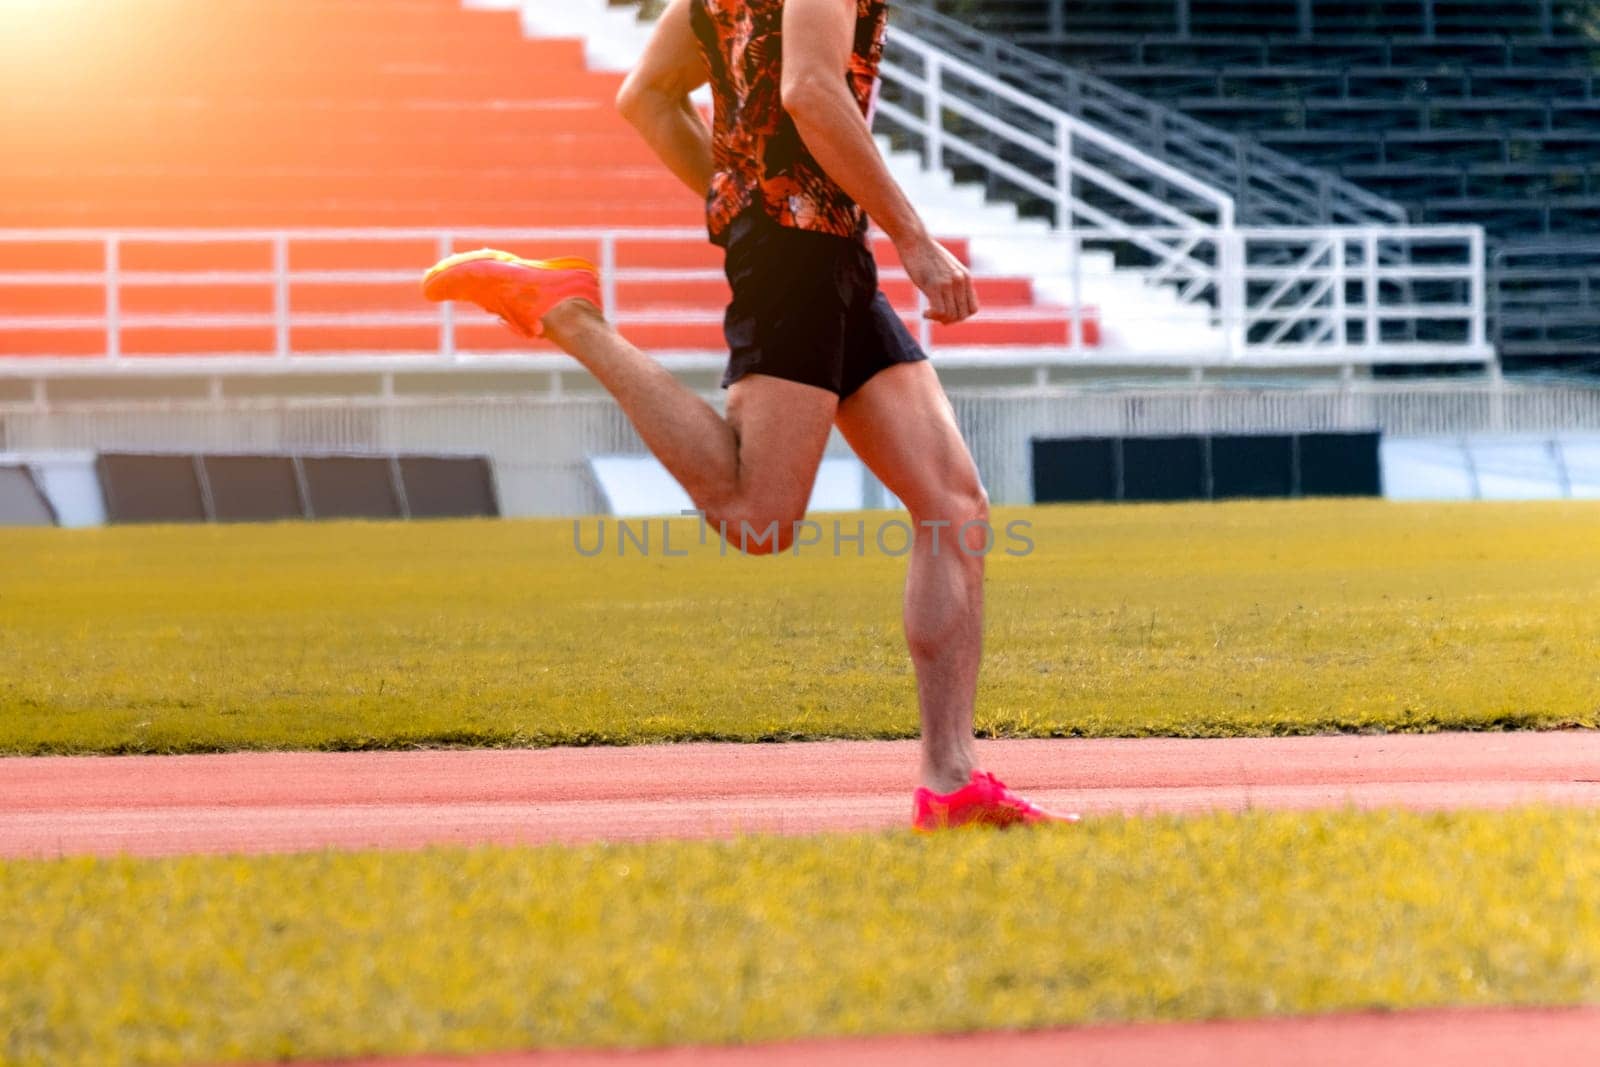 The feet of an athlete running outdoors at the racetrack. Fit young man is running on the race track. Male runner in sportswear running on stadium track with red coating outdoors.